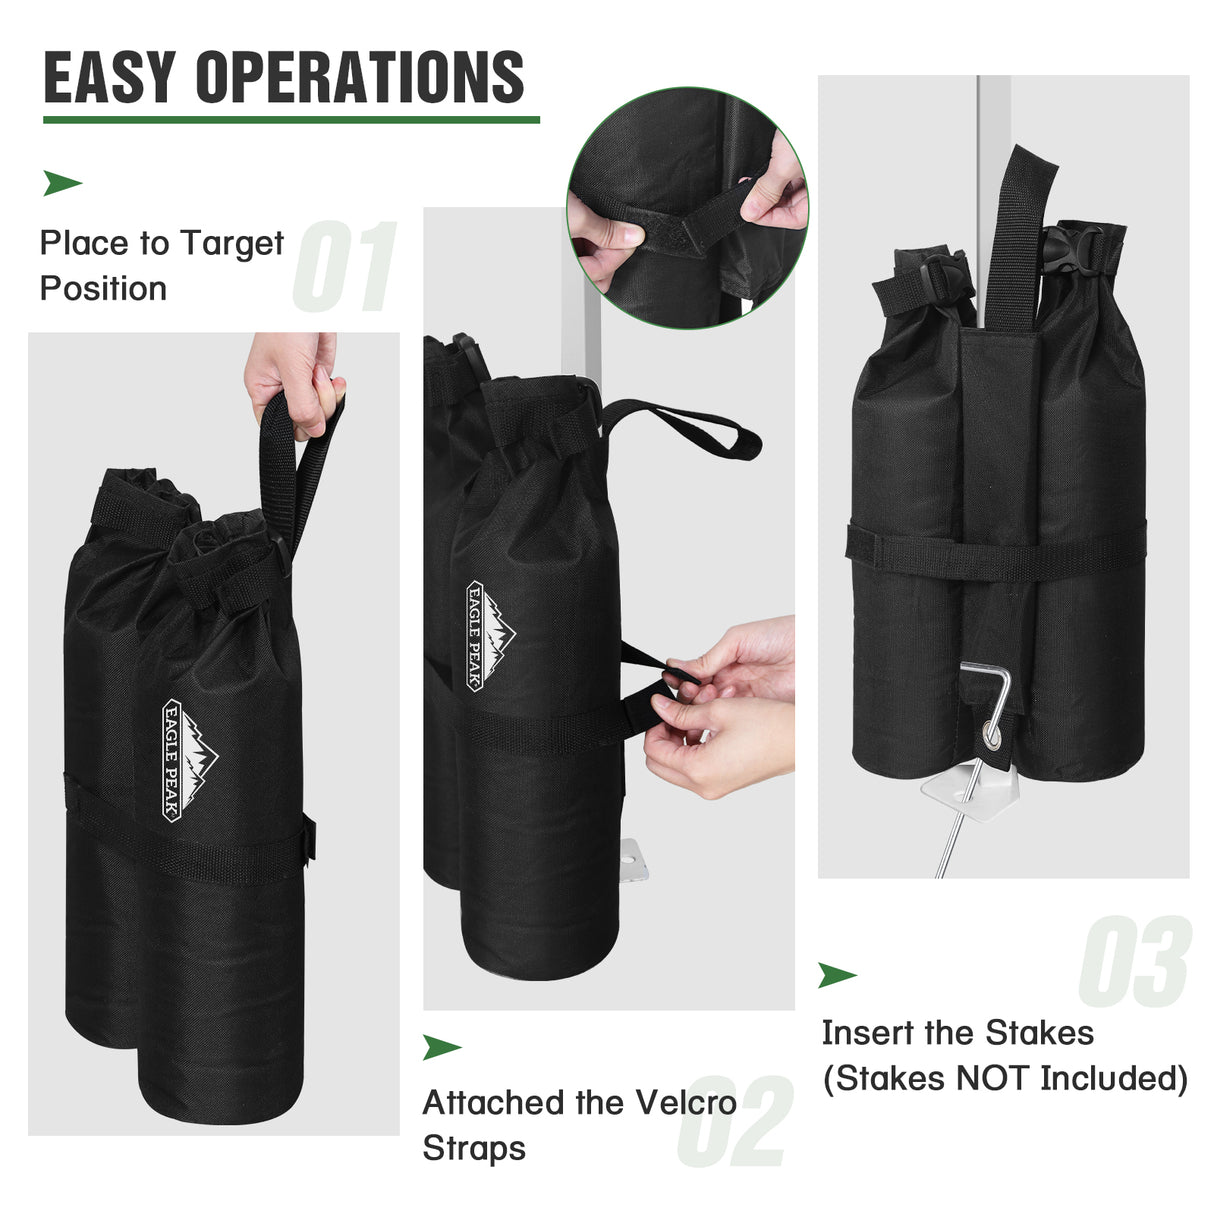 EAGLE PEAK Canopy Weight Bags 4-Pack, Heavy Duty Sand Bags for Pop